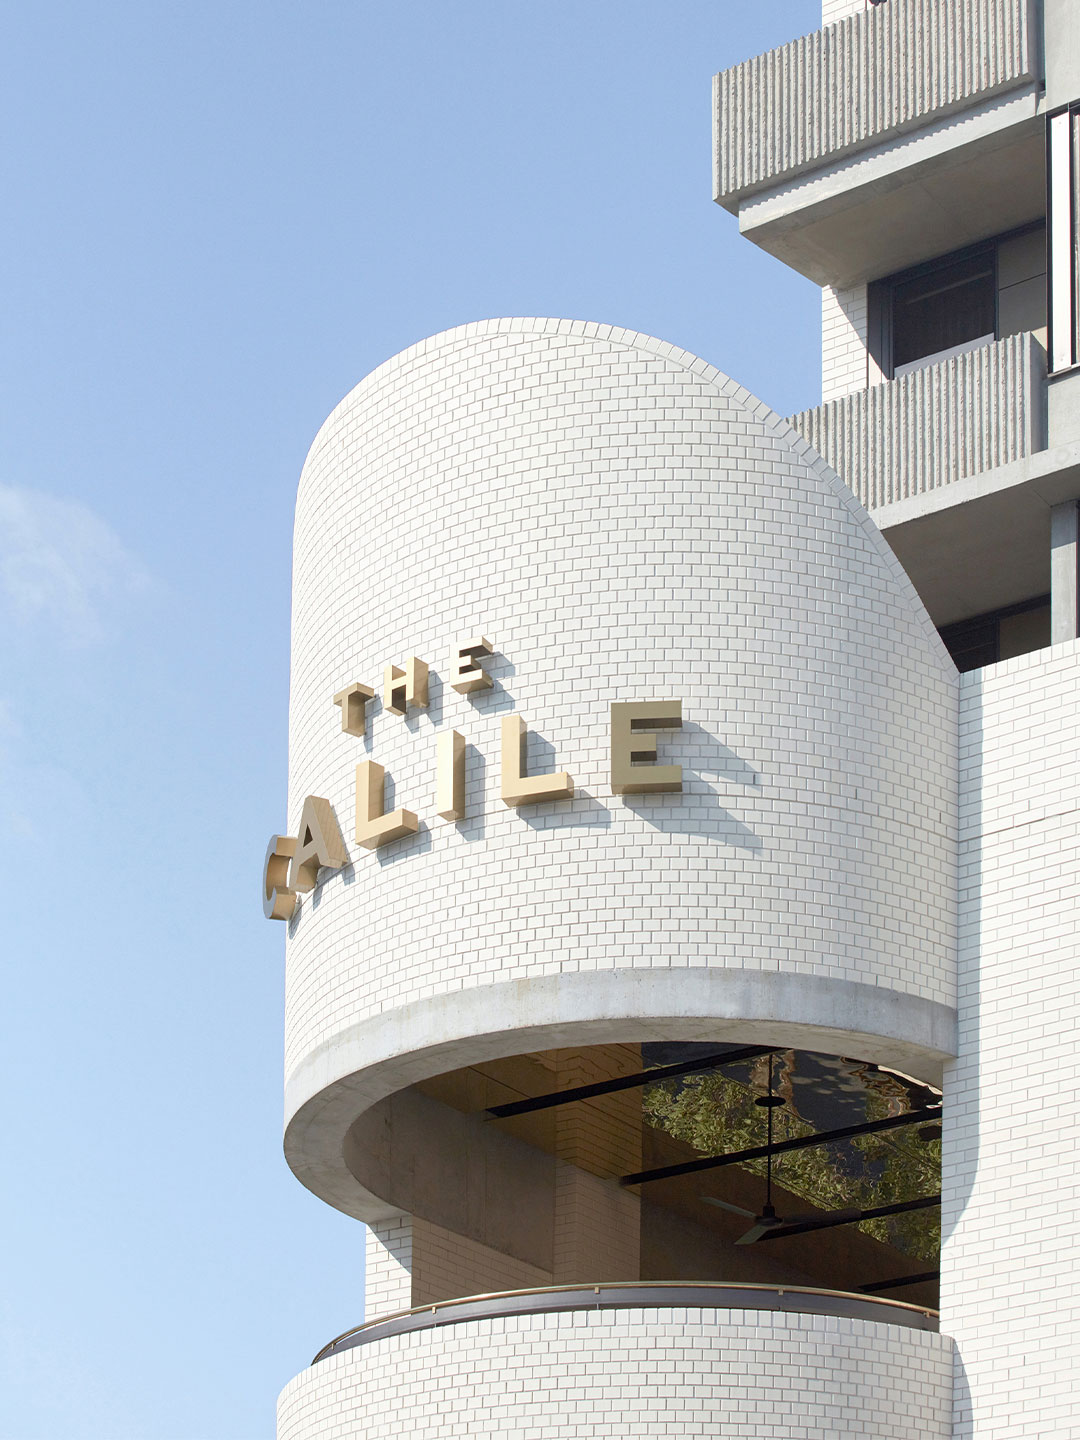 Calile Hotel by Richards and Spence